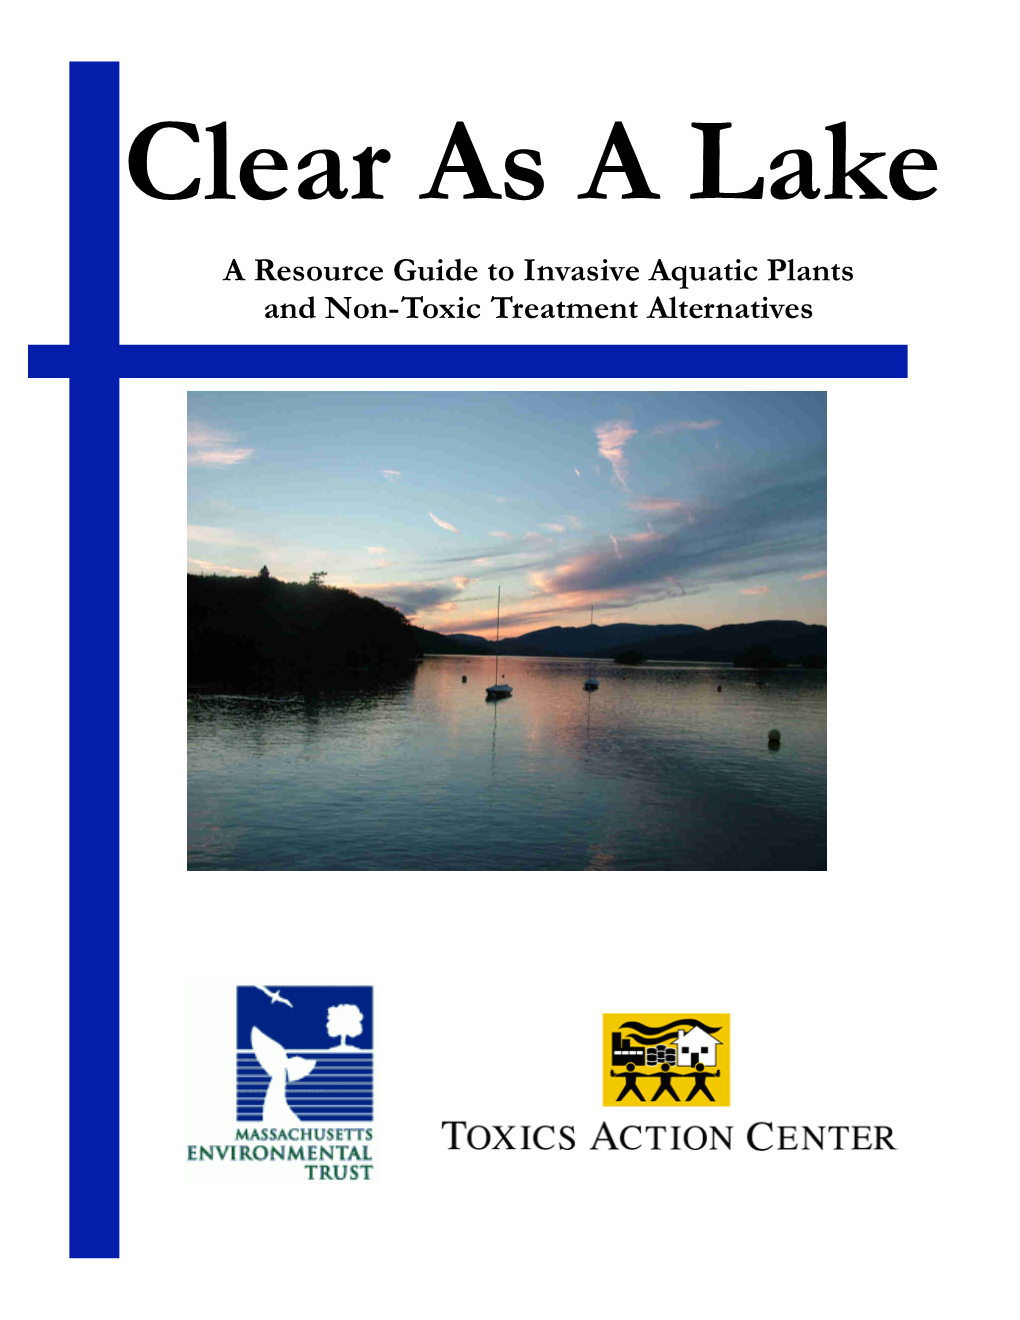 Clear As a Lake: a Resource Guide to Invasive Aquatic Plants and Non